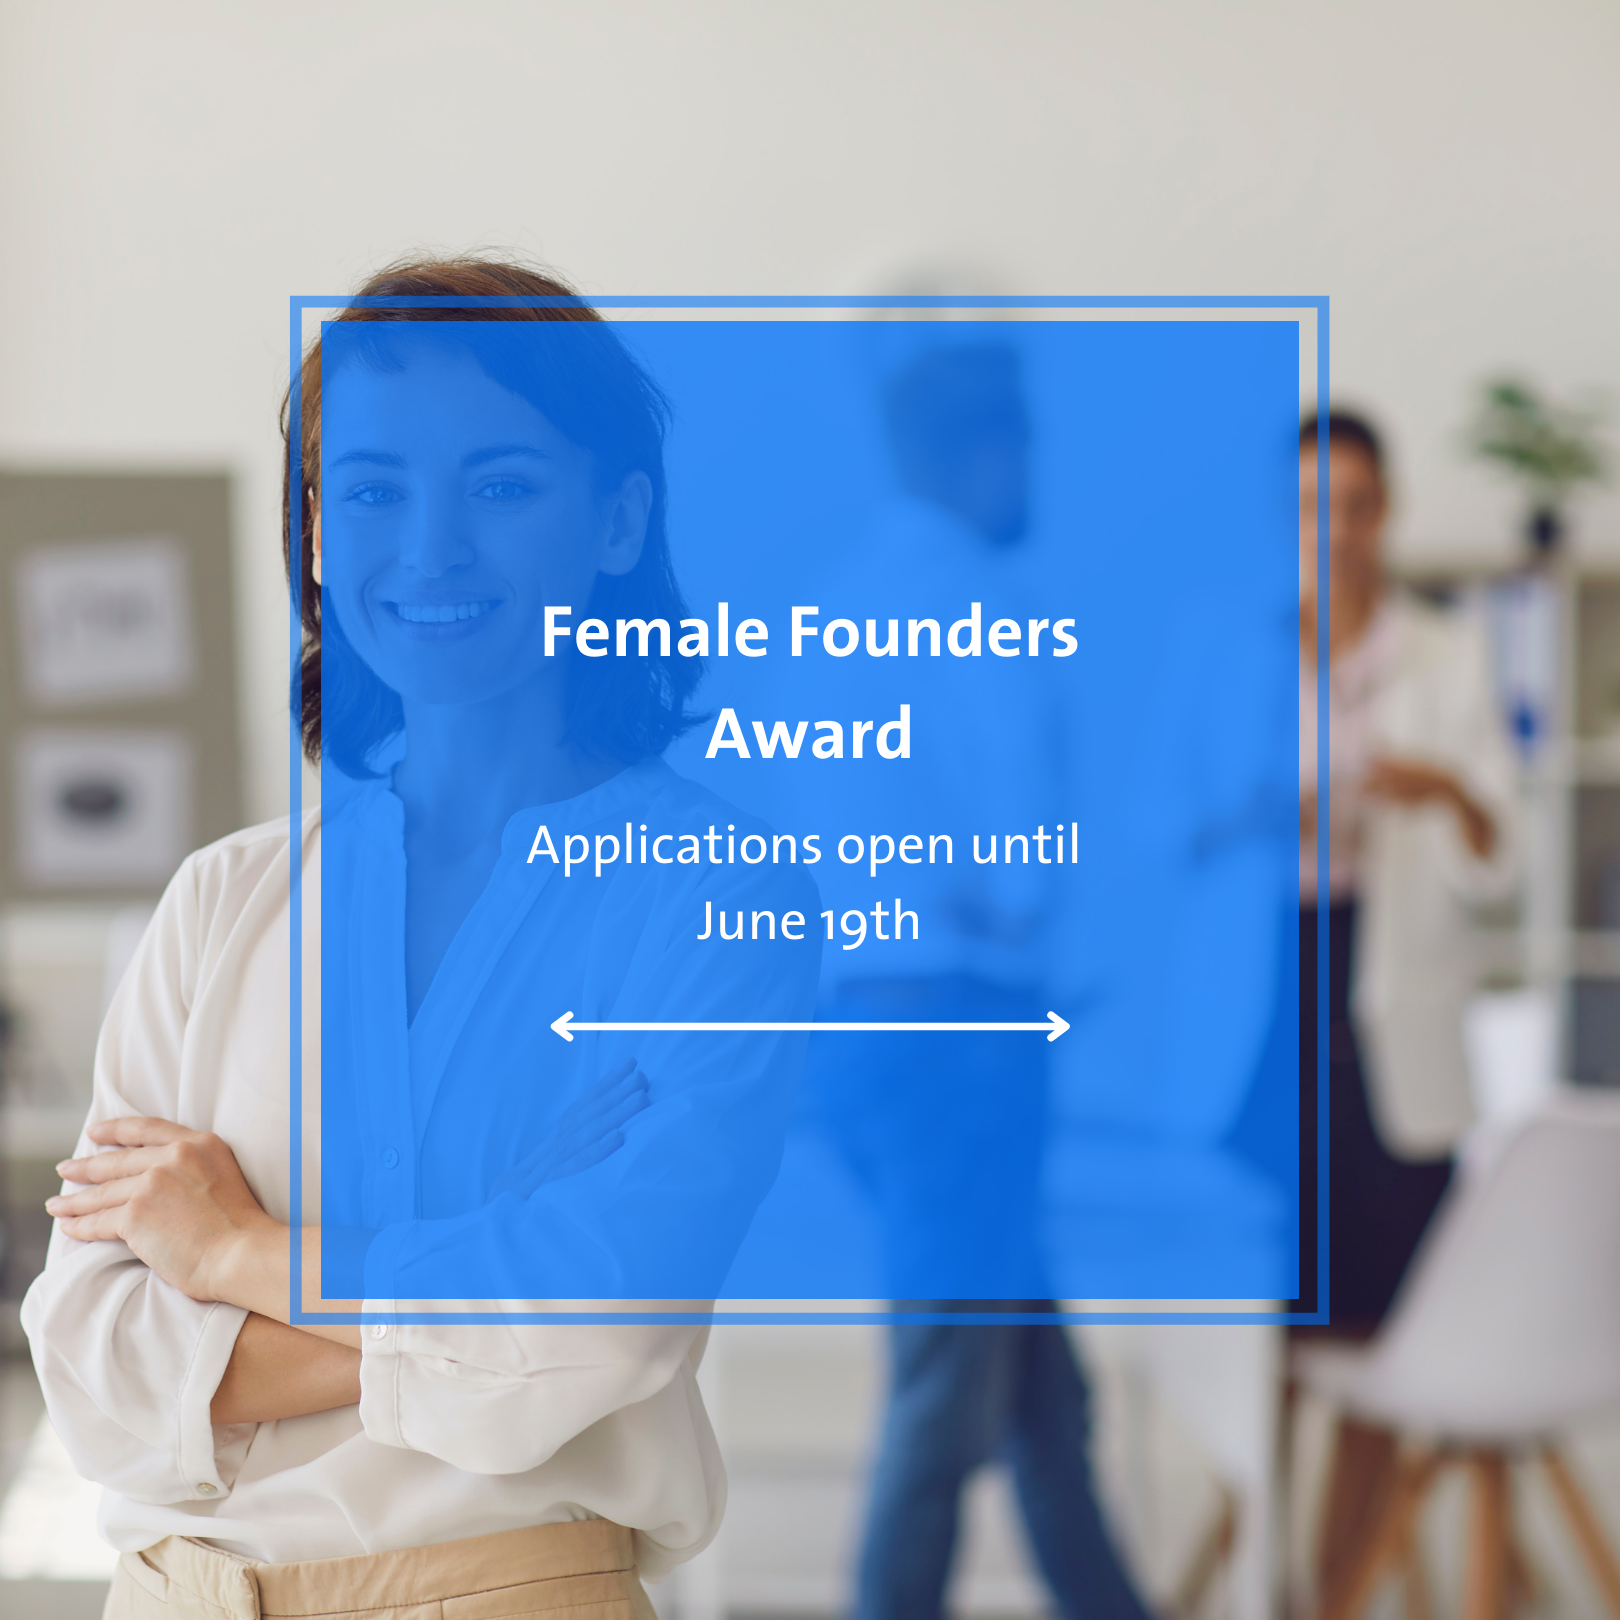 Female Founders Event Invite mit Call to Action